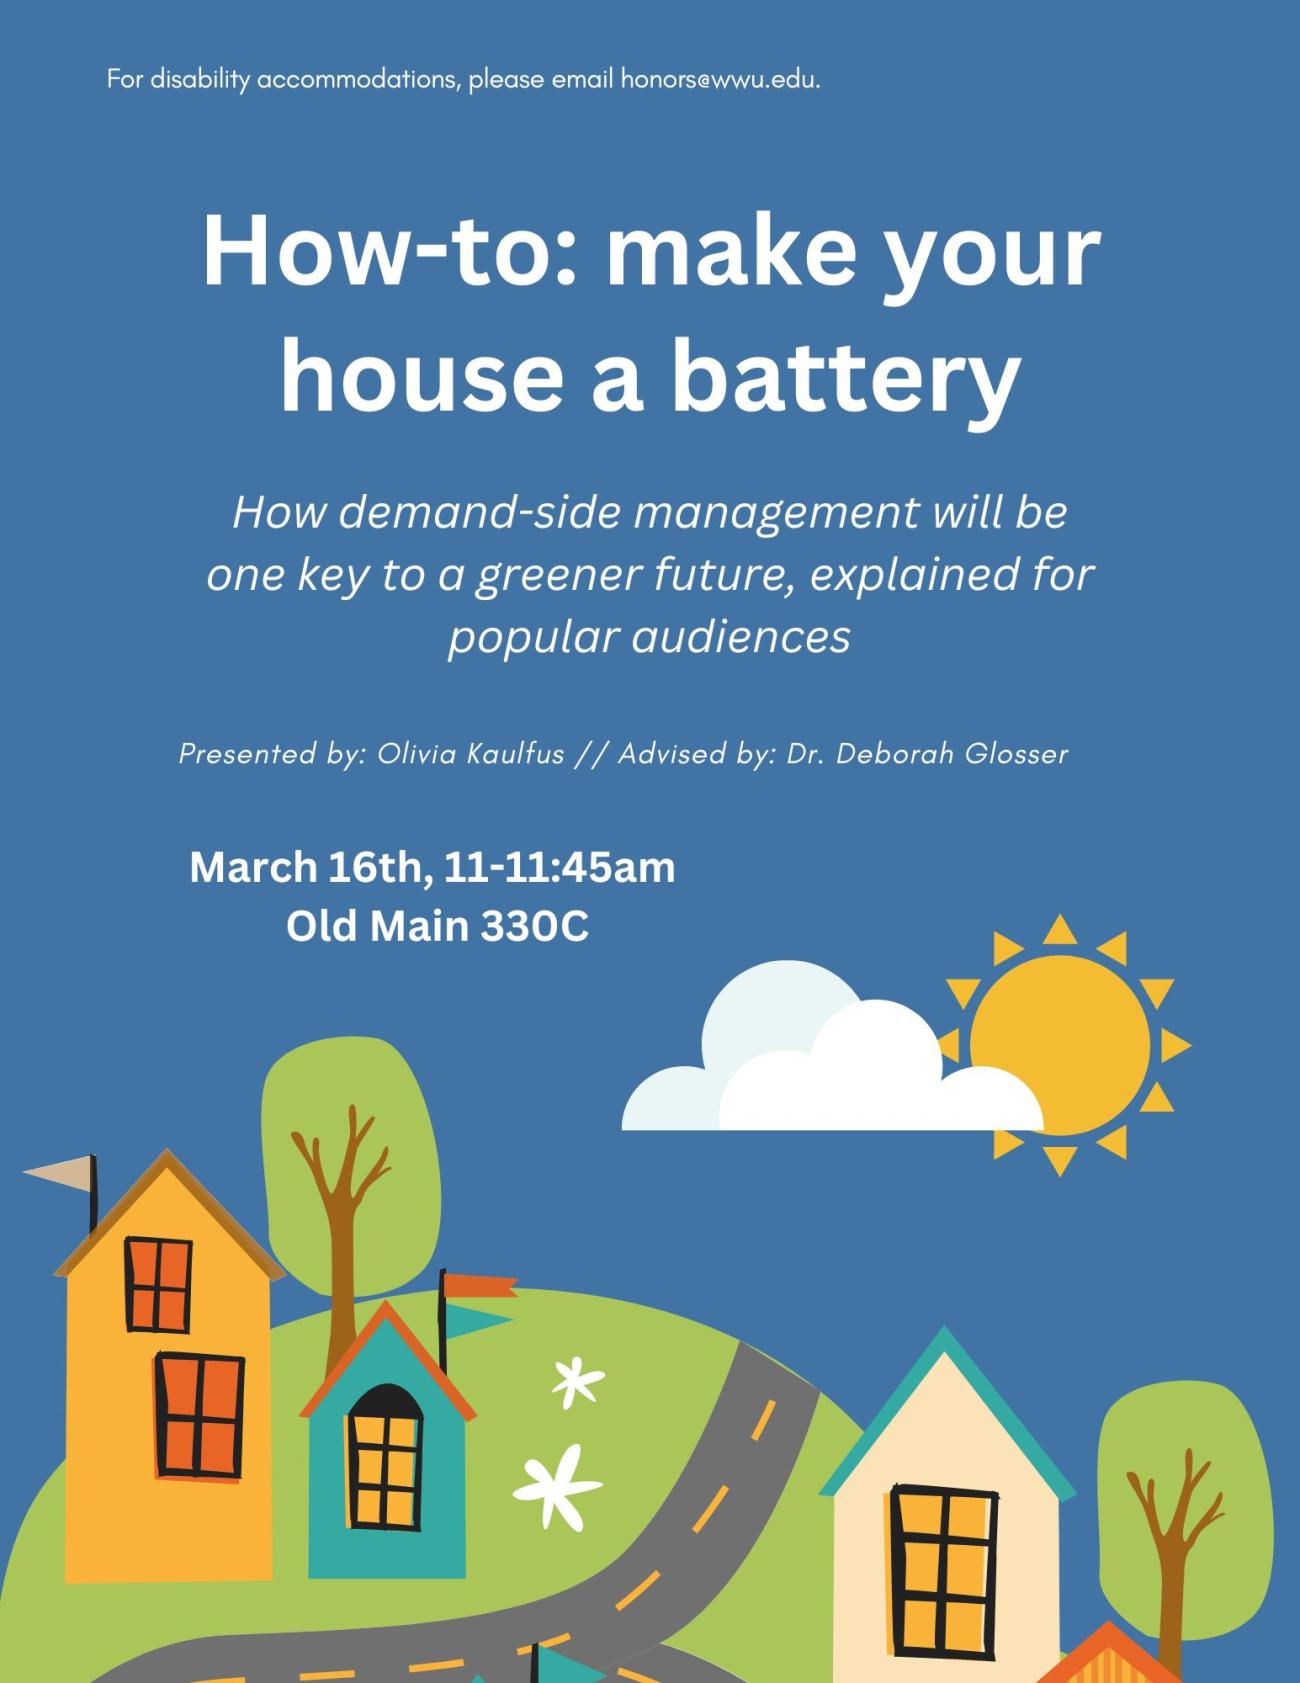 A blue poster with cartoon drawings of 3 houses on a hill with roads and a sun in the sky. Text reads: "For disability accommodations, please email honors@wwu.edu. How-to: make your house a battery. How demand-side management will be one key to a greener future, explained for popular audiences. Presented by Olivia Kaulfus Advised by Deborah Glosser. March 16th, 11-11:45 am. Old Main 330C."